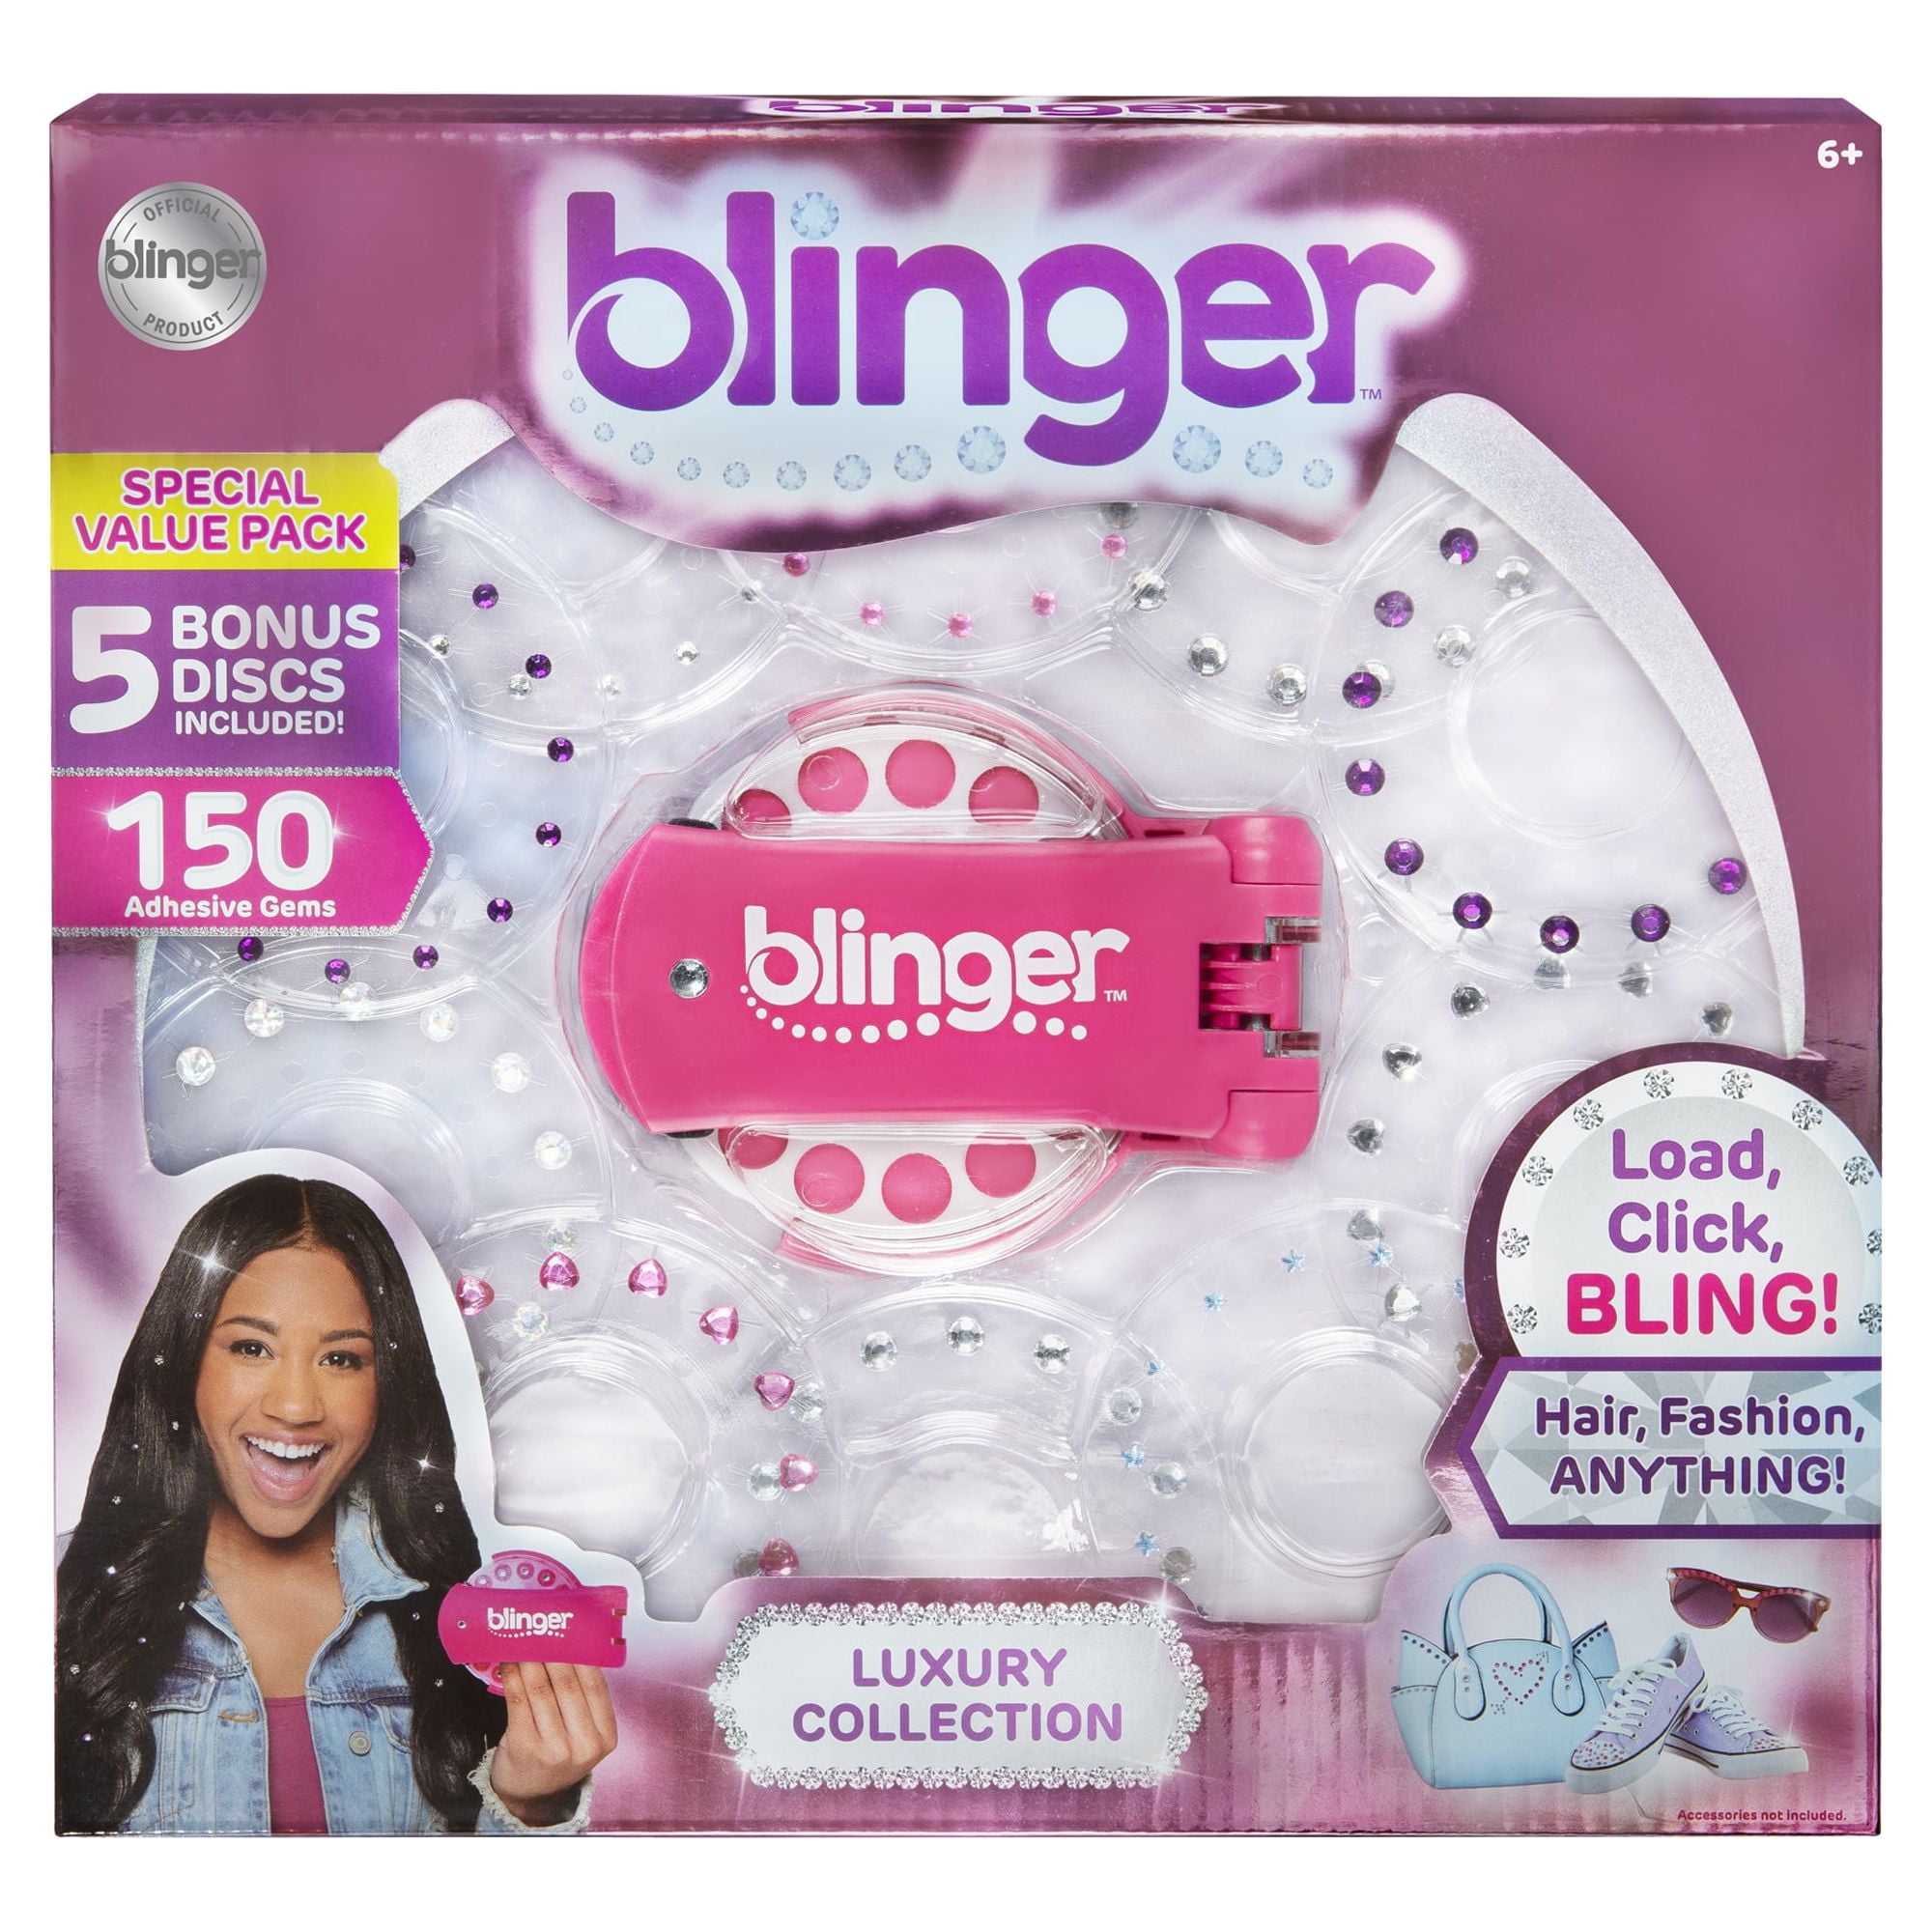 Blinger Ultimate Set, Glam Collection, Comes with Glam Styling Tool & 225  Gems - Makeup Sets & Kits, Facebook Marketplace